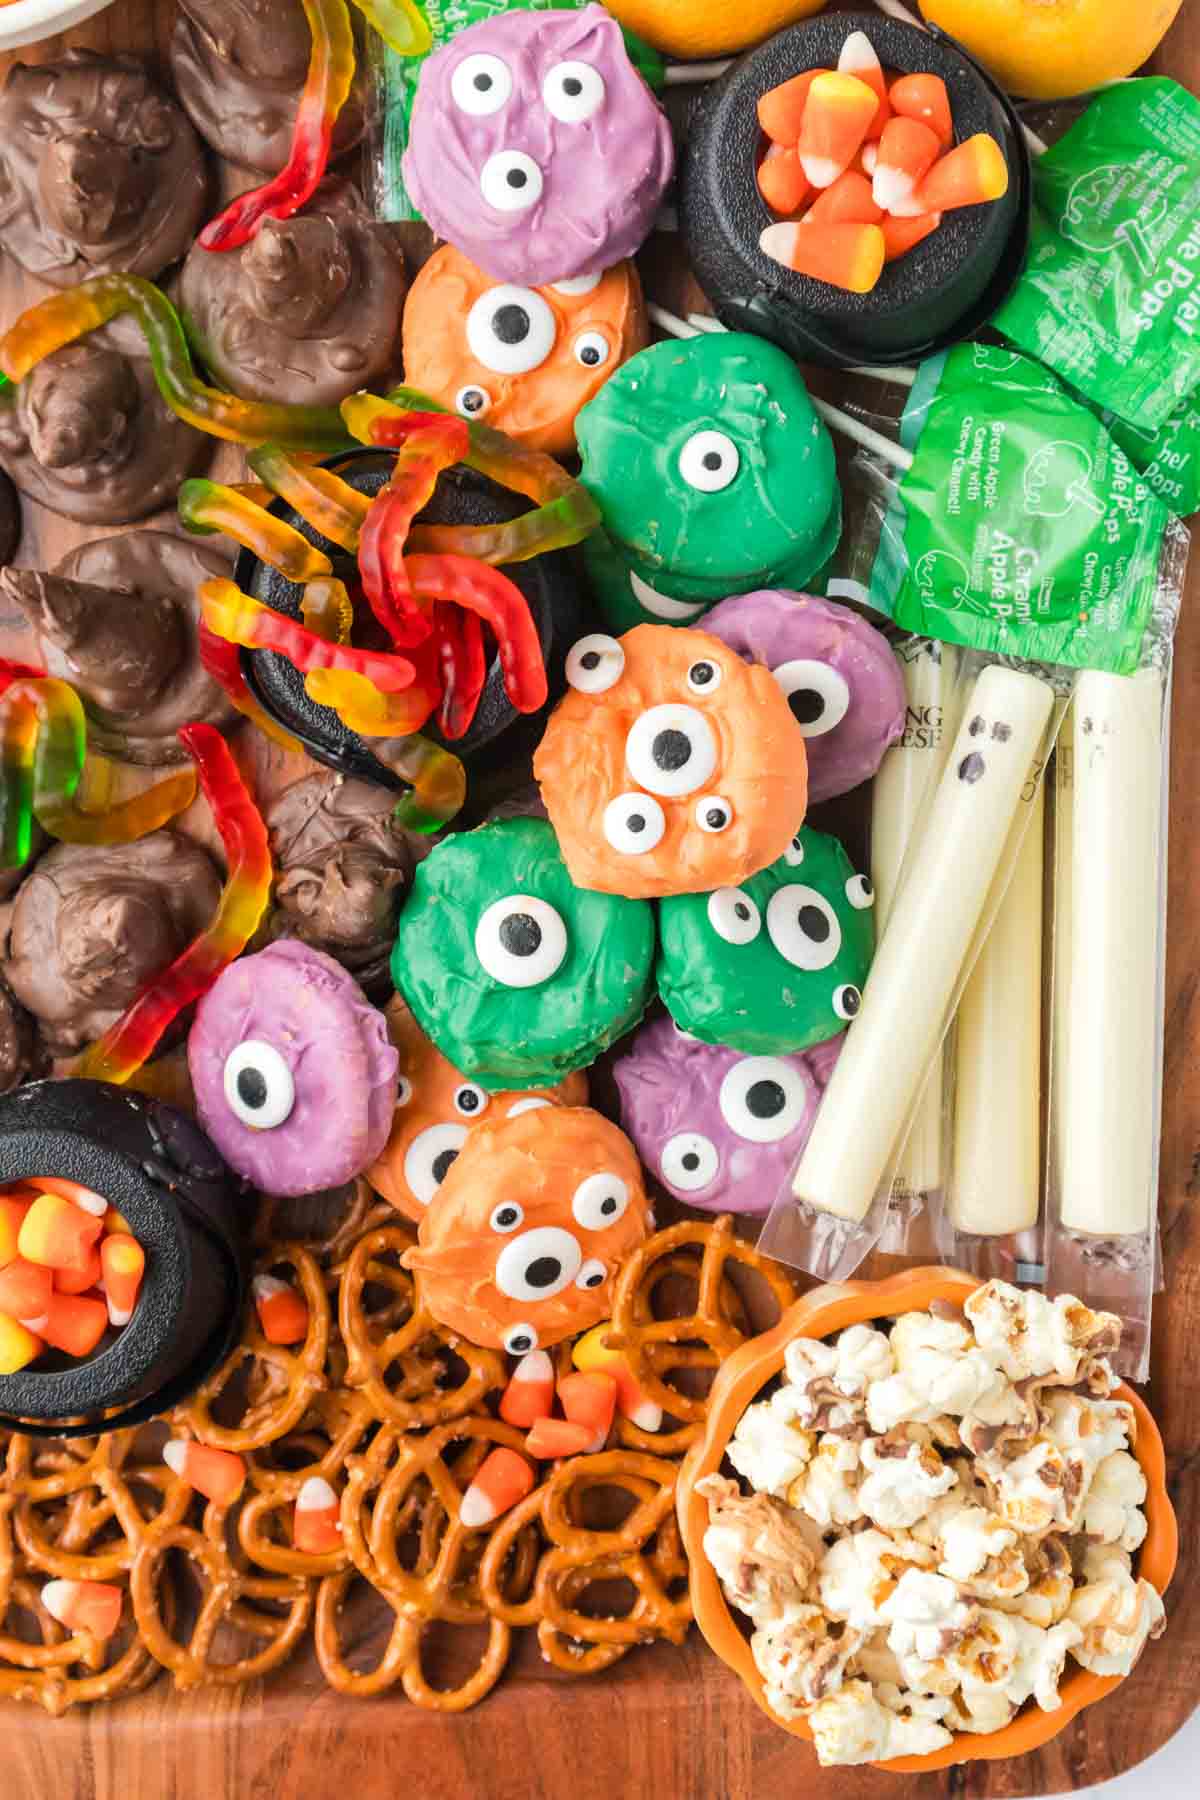 Halloween snack board with monster cookies, pretzels, and string cheese